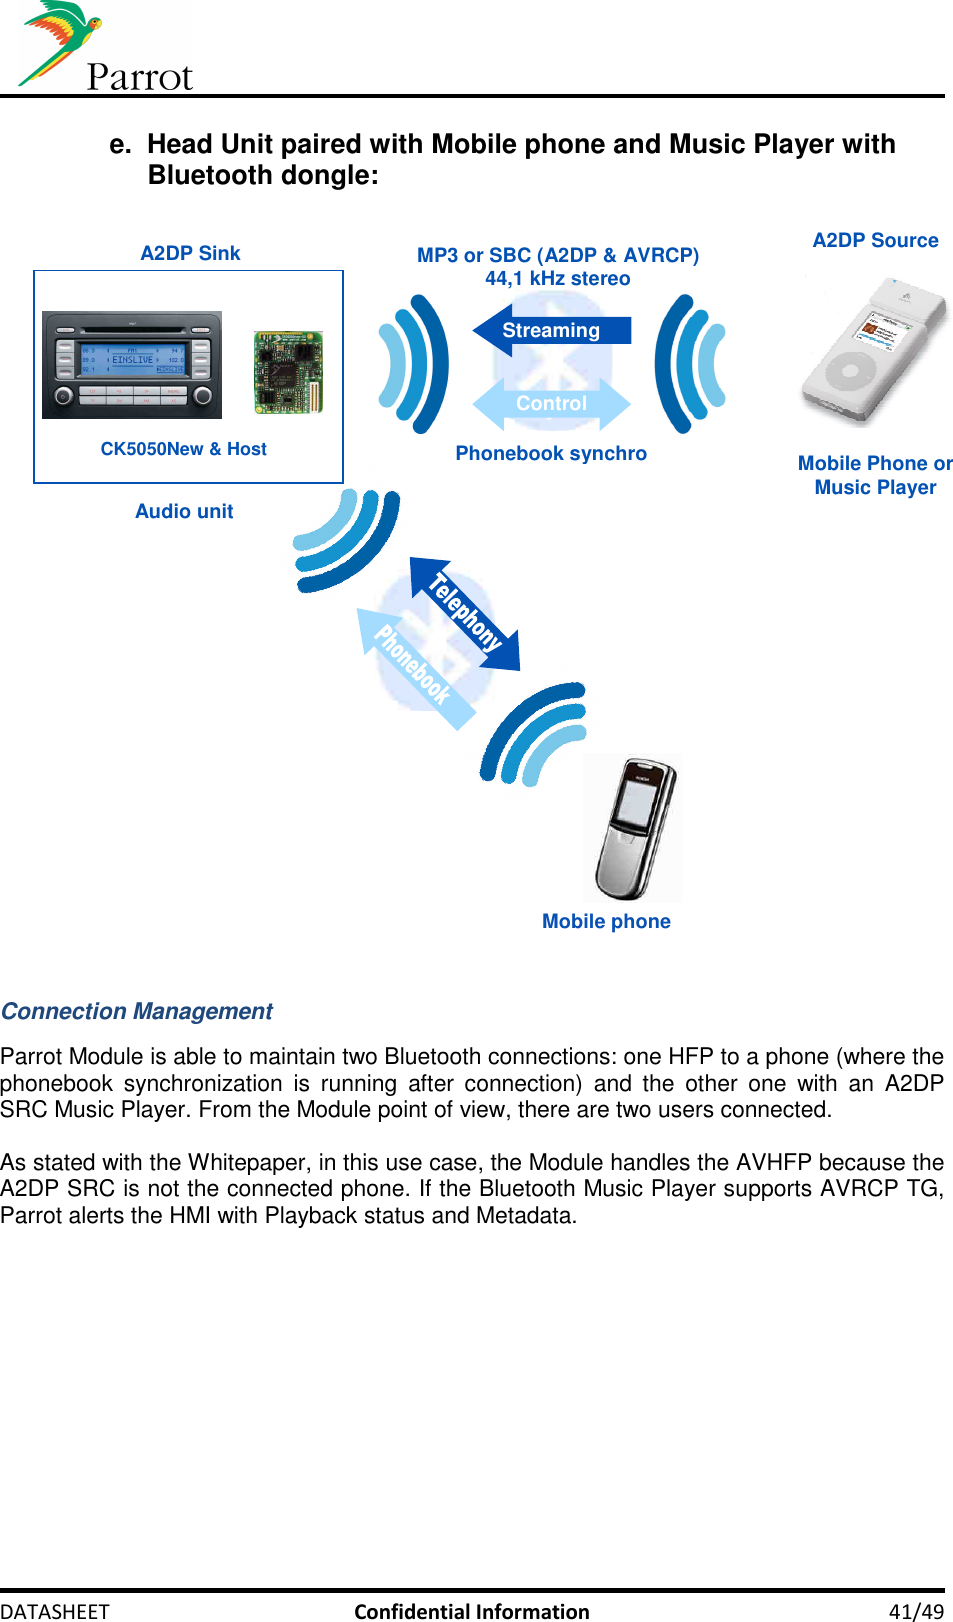     DATASHEET  Confidential Information  41/49 e.  Head Unit paired with Mobile phone and Music Player with Bluetooth dongle:   A2DP Source A2DP SinkMobile Phone orMusic Player Audio unitMP3 or SBC (A2DP &amp; AVRCP)44,1 kHz stereo StreamingControlPhonebook synchroMobile phone CK5050New &amp; Host   Connection Management  Parrot Module is able to maintain two Bluetooth connections: one HFP to a phone (where the phonebook  synchronization  is  running  after  connection)  and  the  other  one  with  an  A2DP SRC Music Player. From the Module point of view, there are two users connected.  As stated with the Whitepaper, in this use case, the Module handles the AVHFP because the A2DP SRC is not the connected phone. If the Bluetooth Music Player supports AVRCP TG, Parrot alerts the HMI with Playback status and Metadata. 